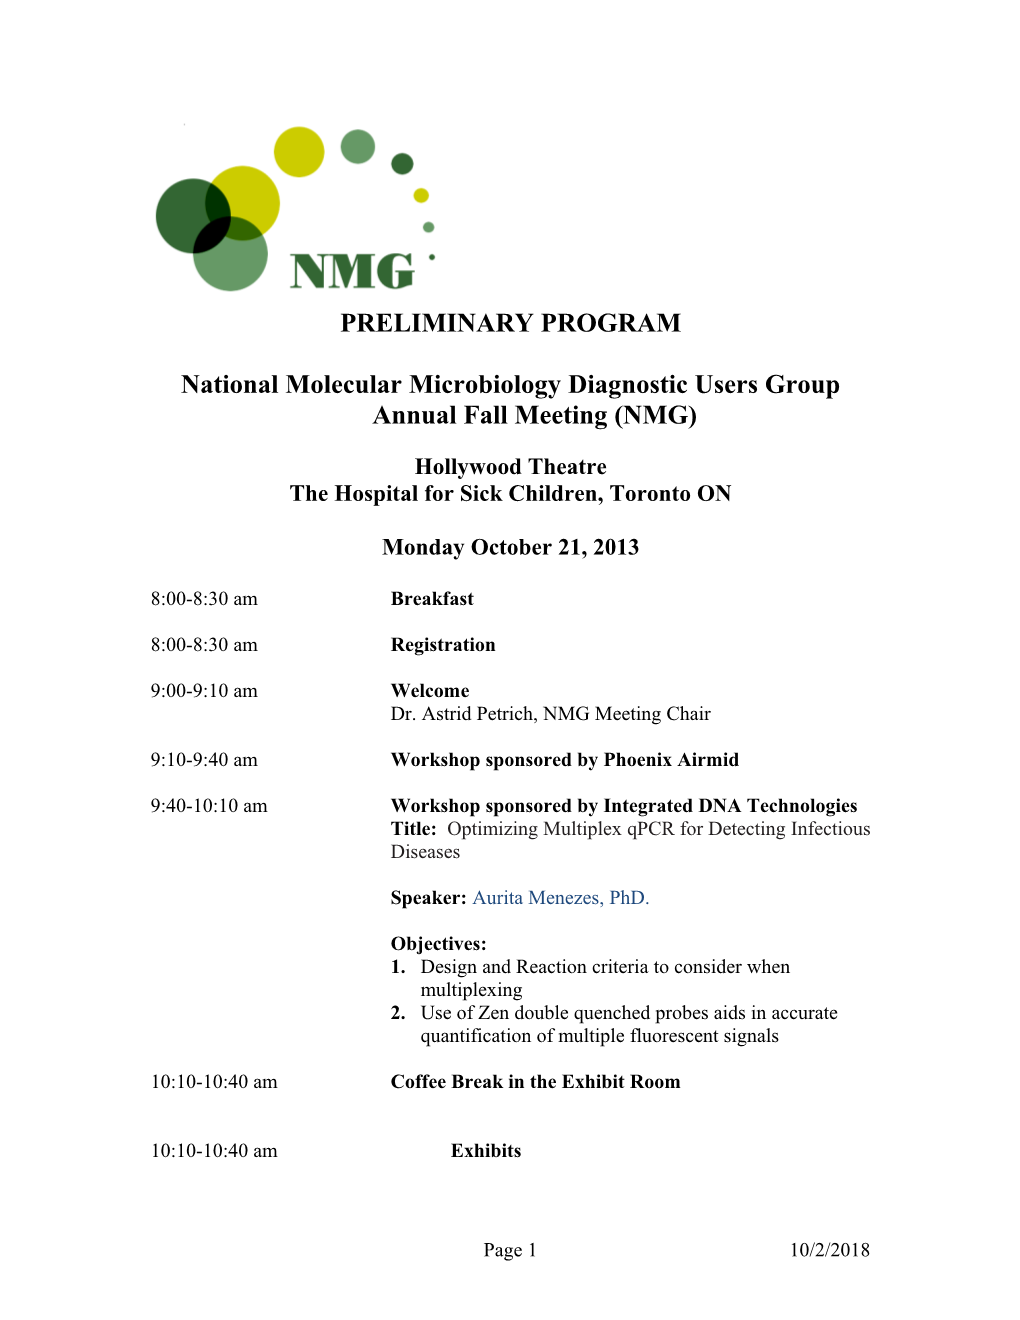 National Molecular Microbiology Diagnostic Users Group Annual Fall Meeting (NMG)